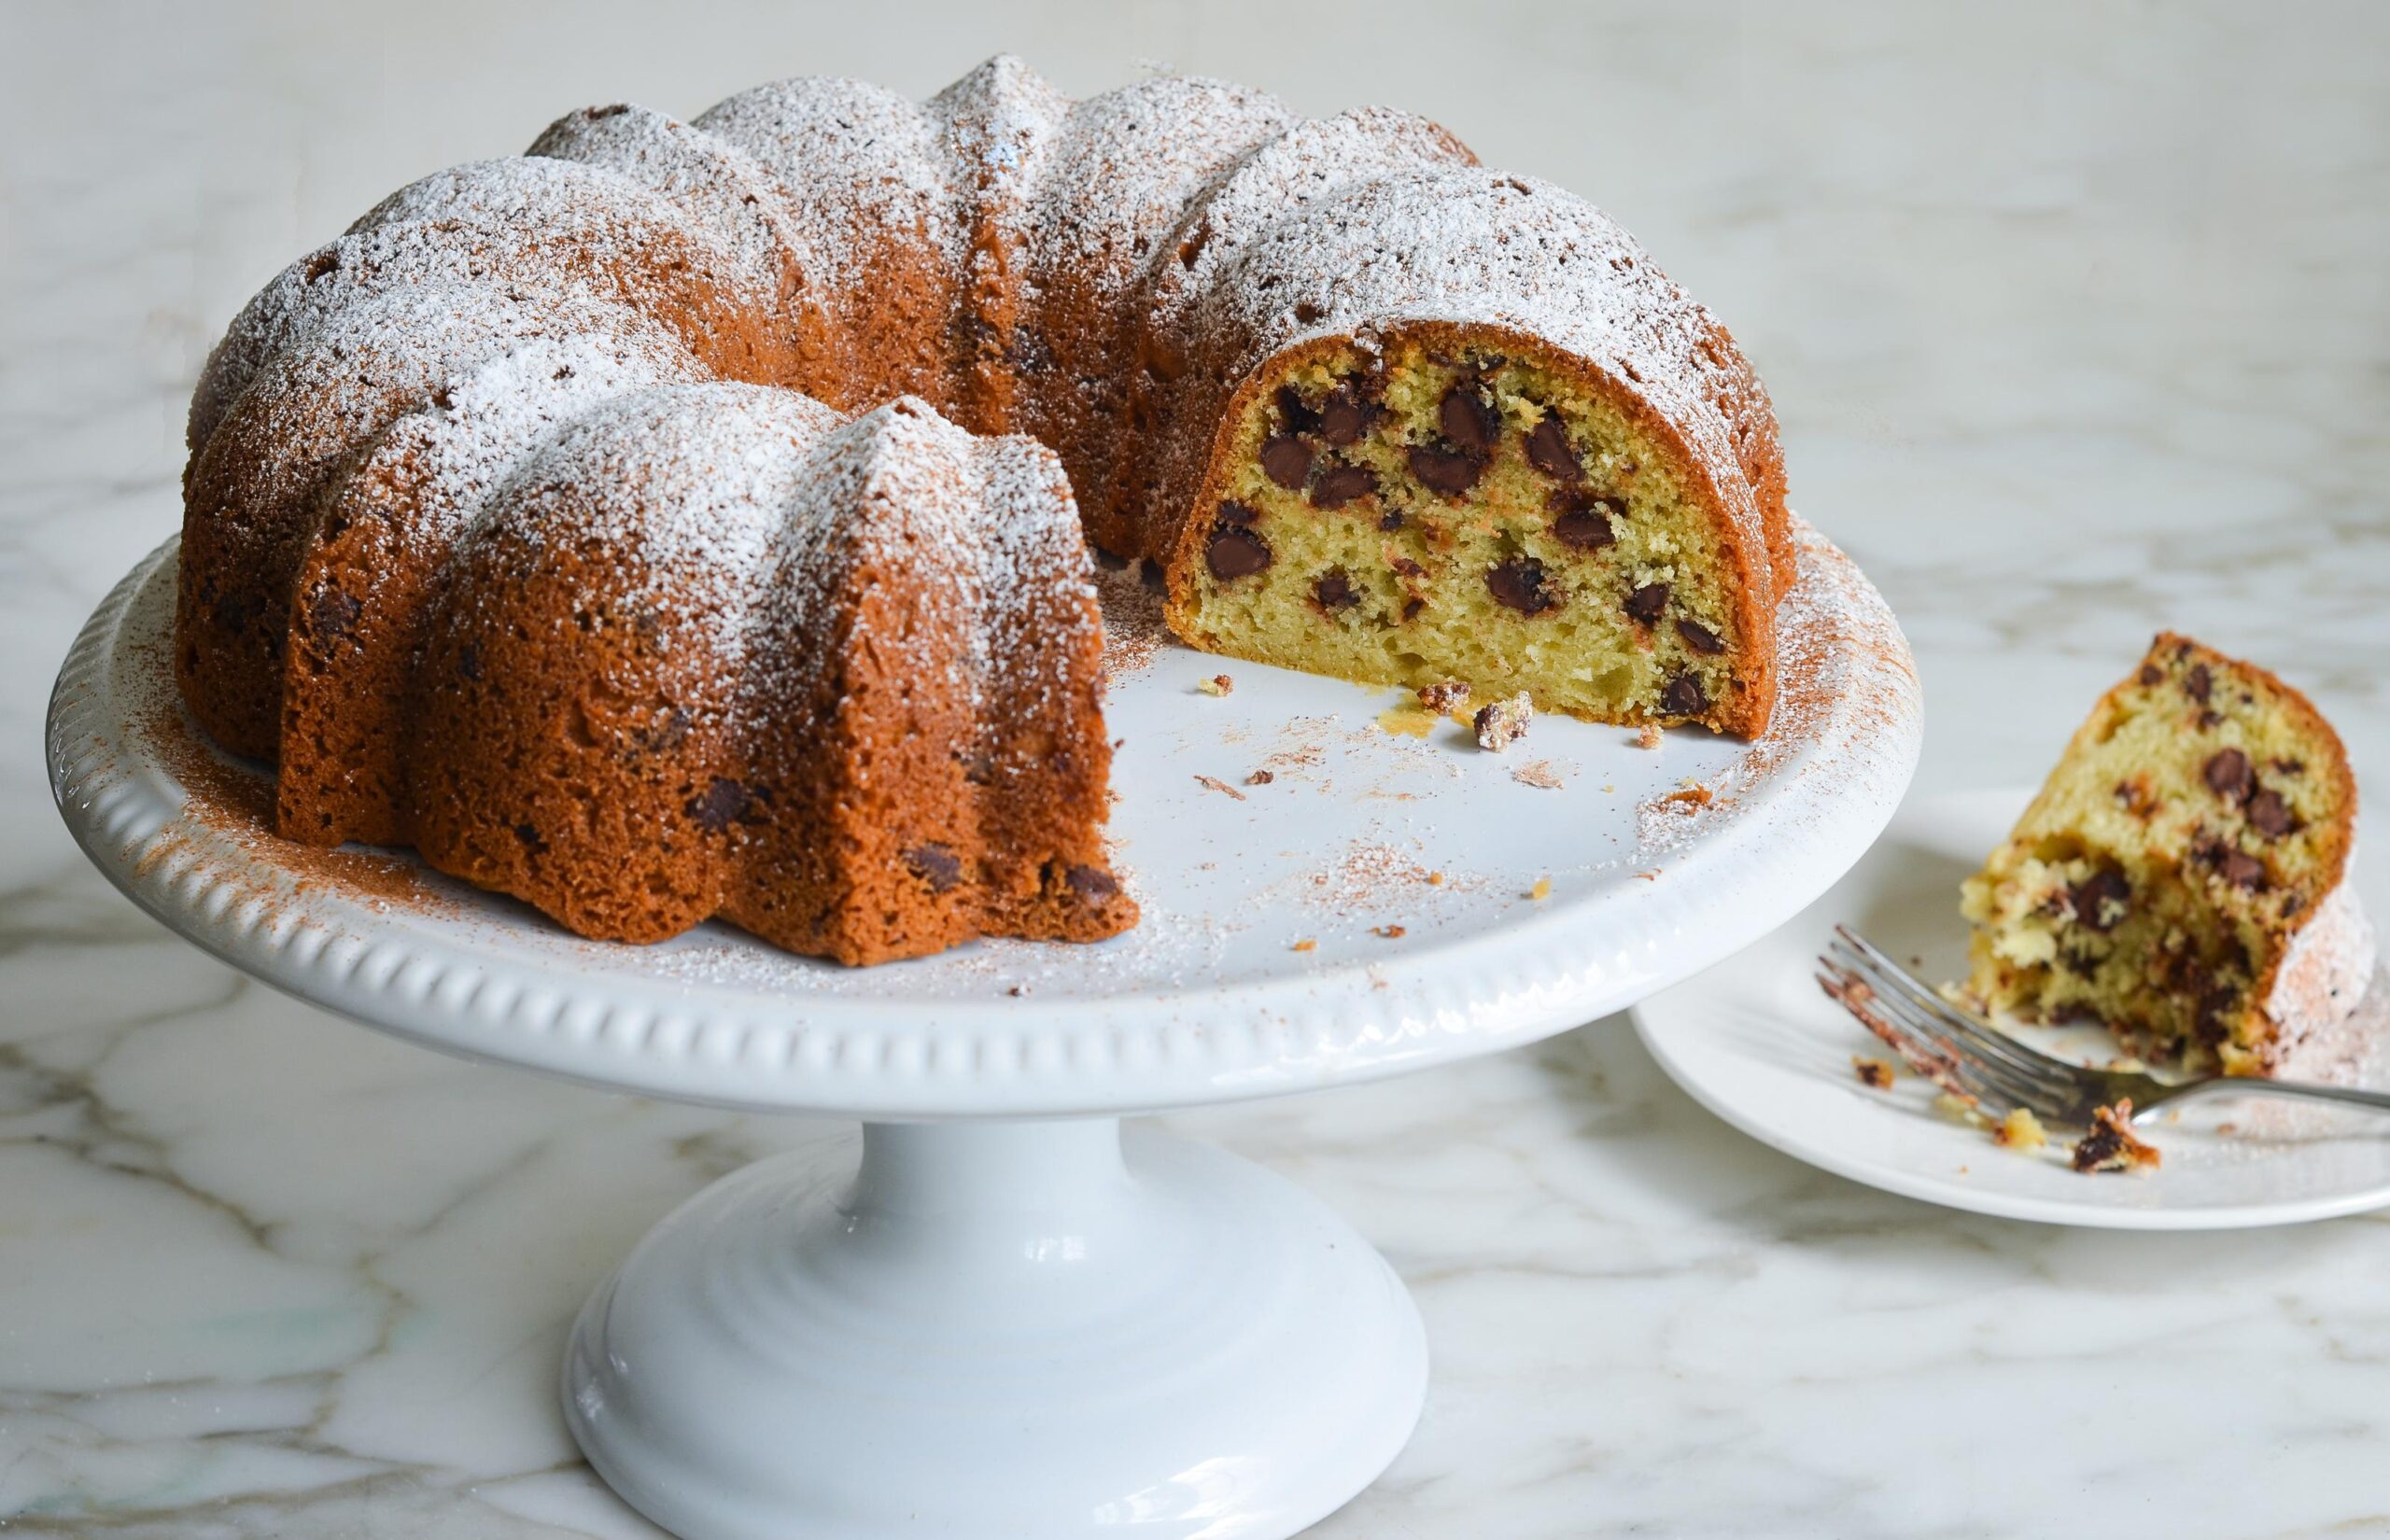  A slice of heaven on a plate: Sour Cream Chocolate Chip Coffee Cake.